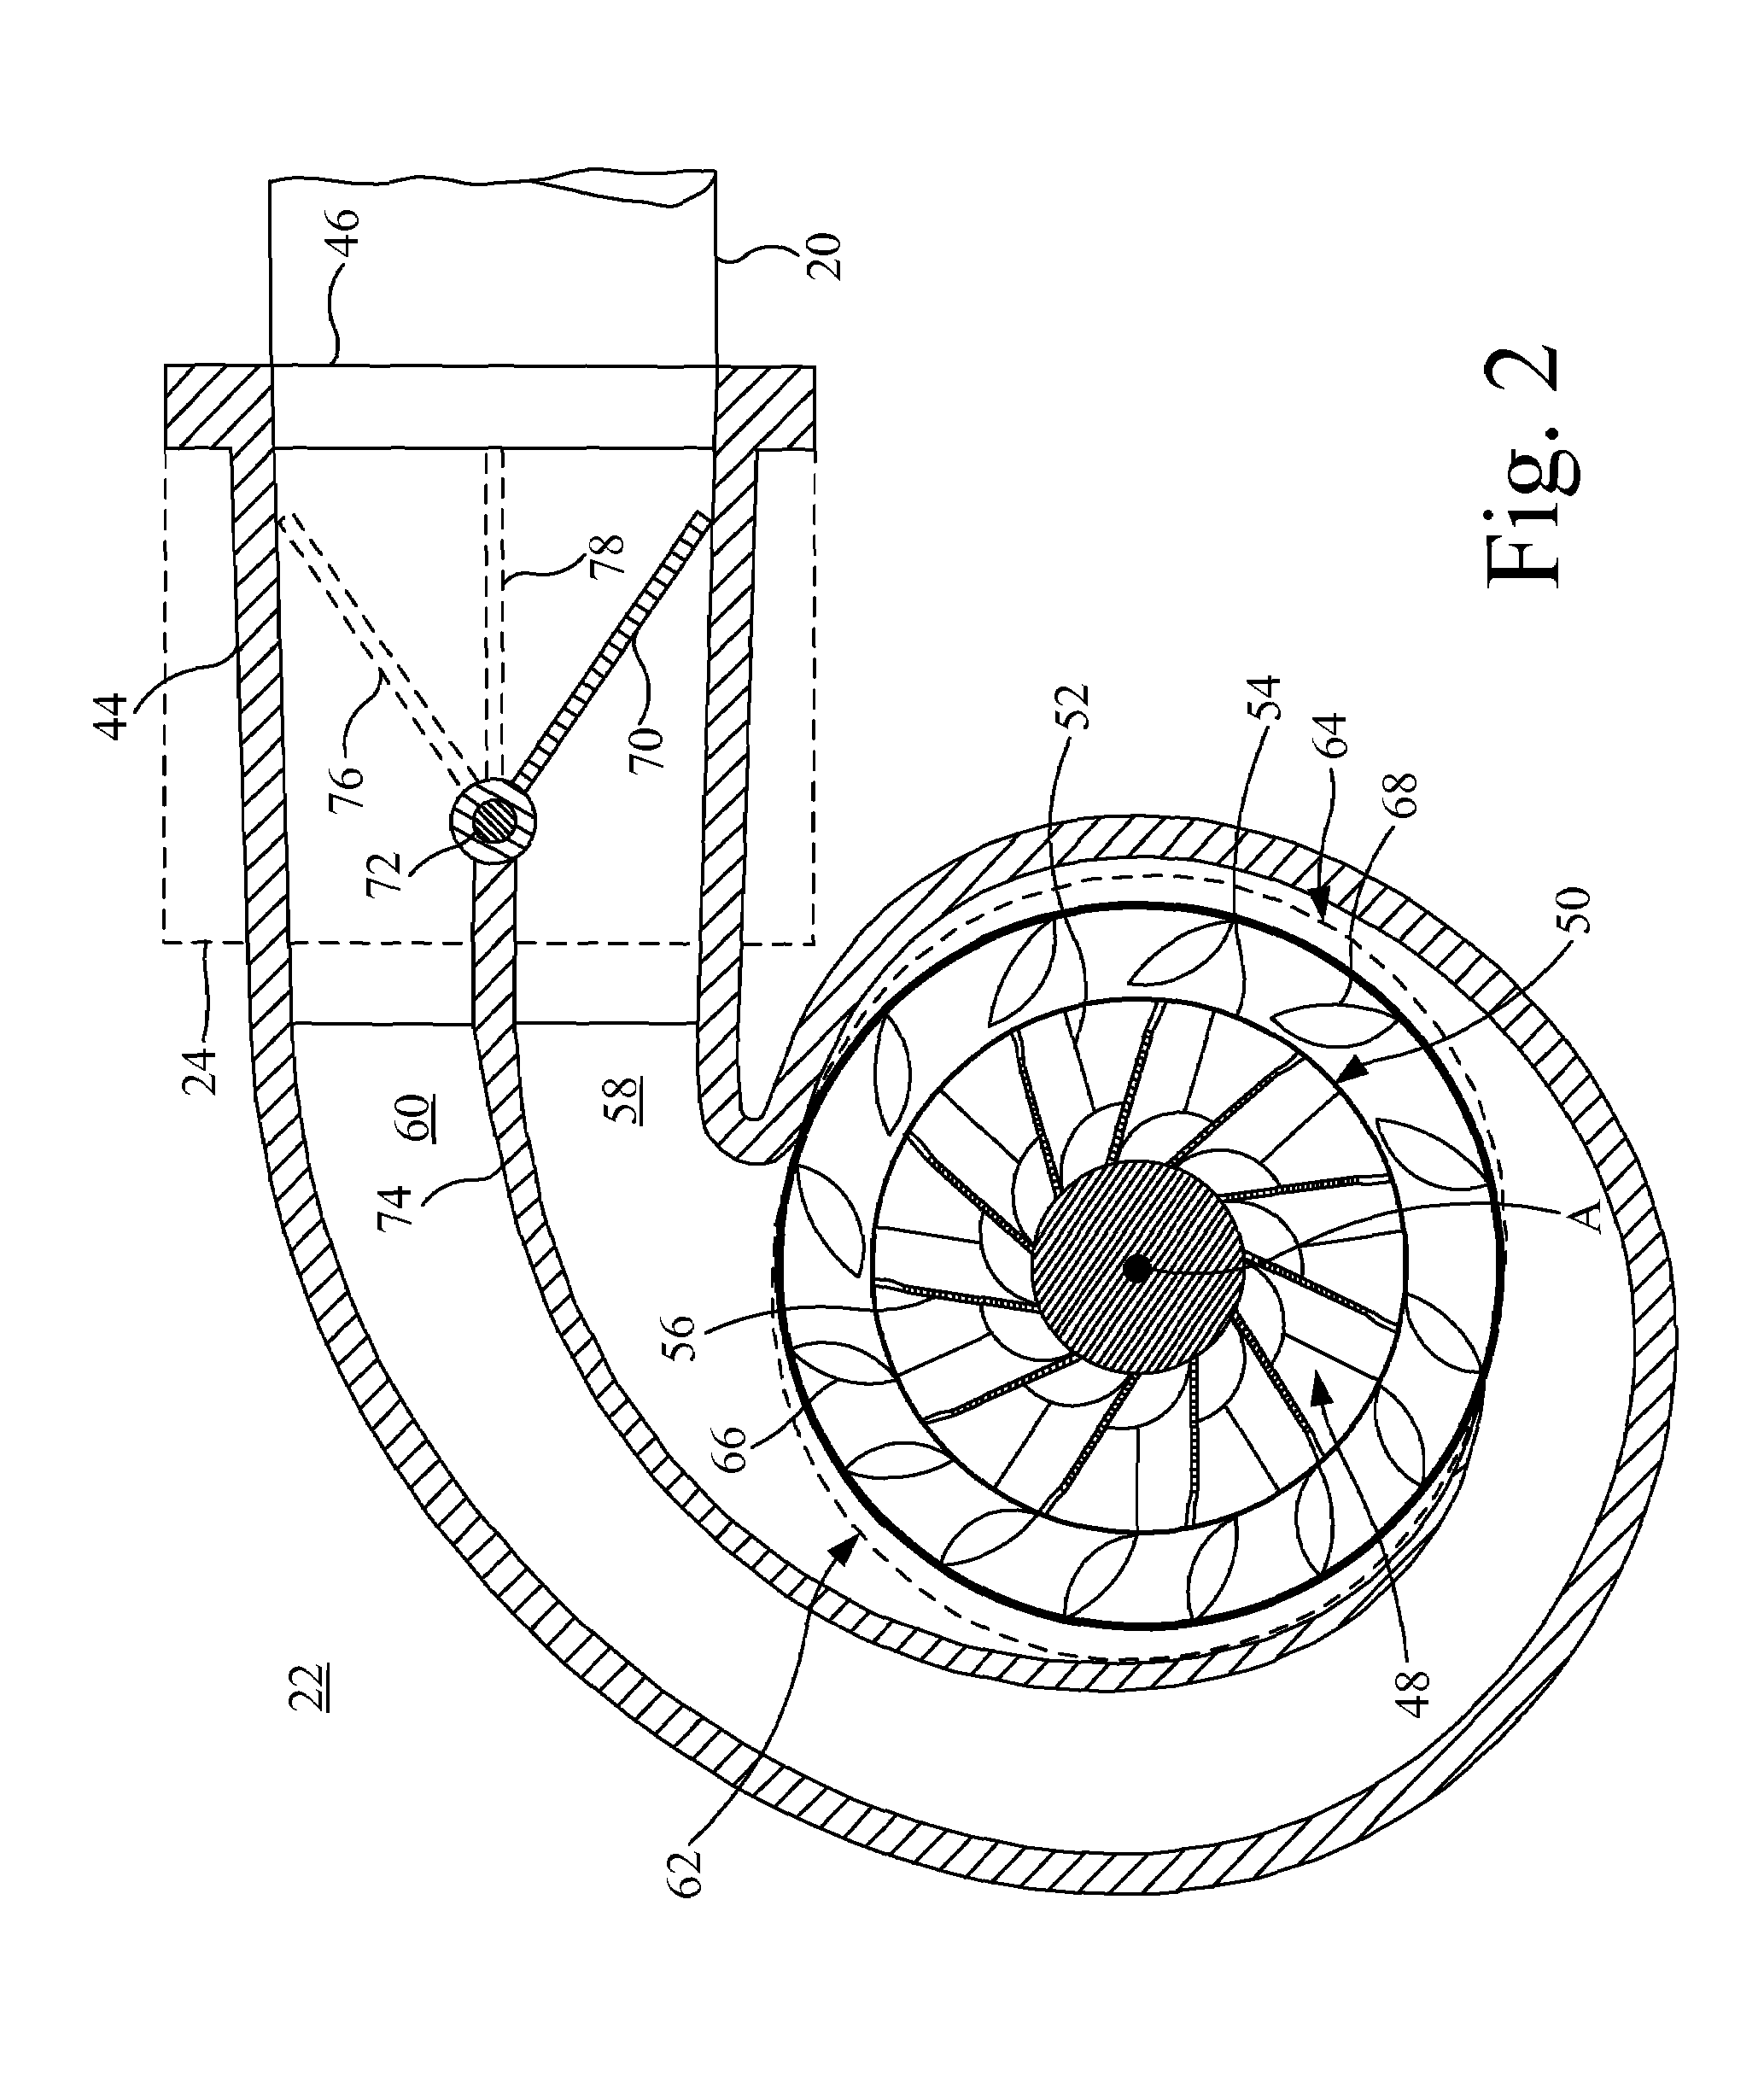 Internal combustion engine system having a power turbine with a broad efficiency range